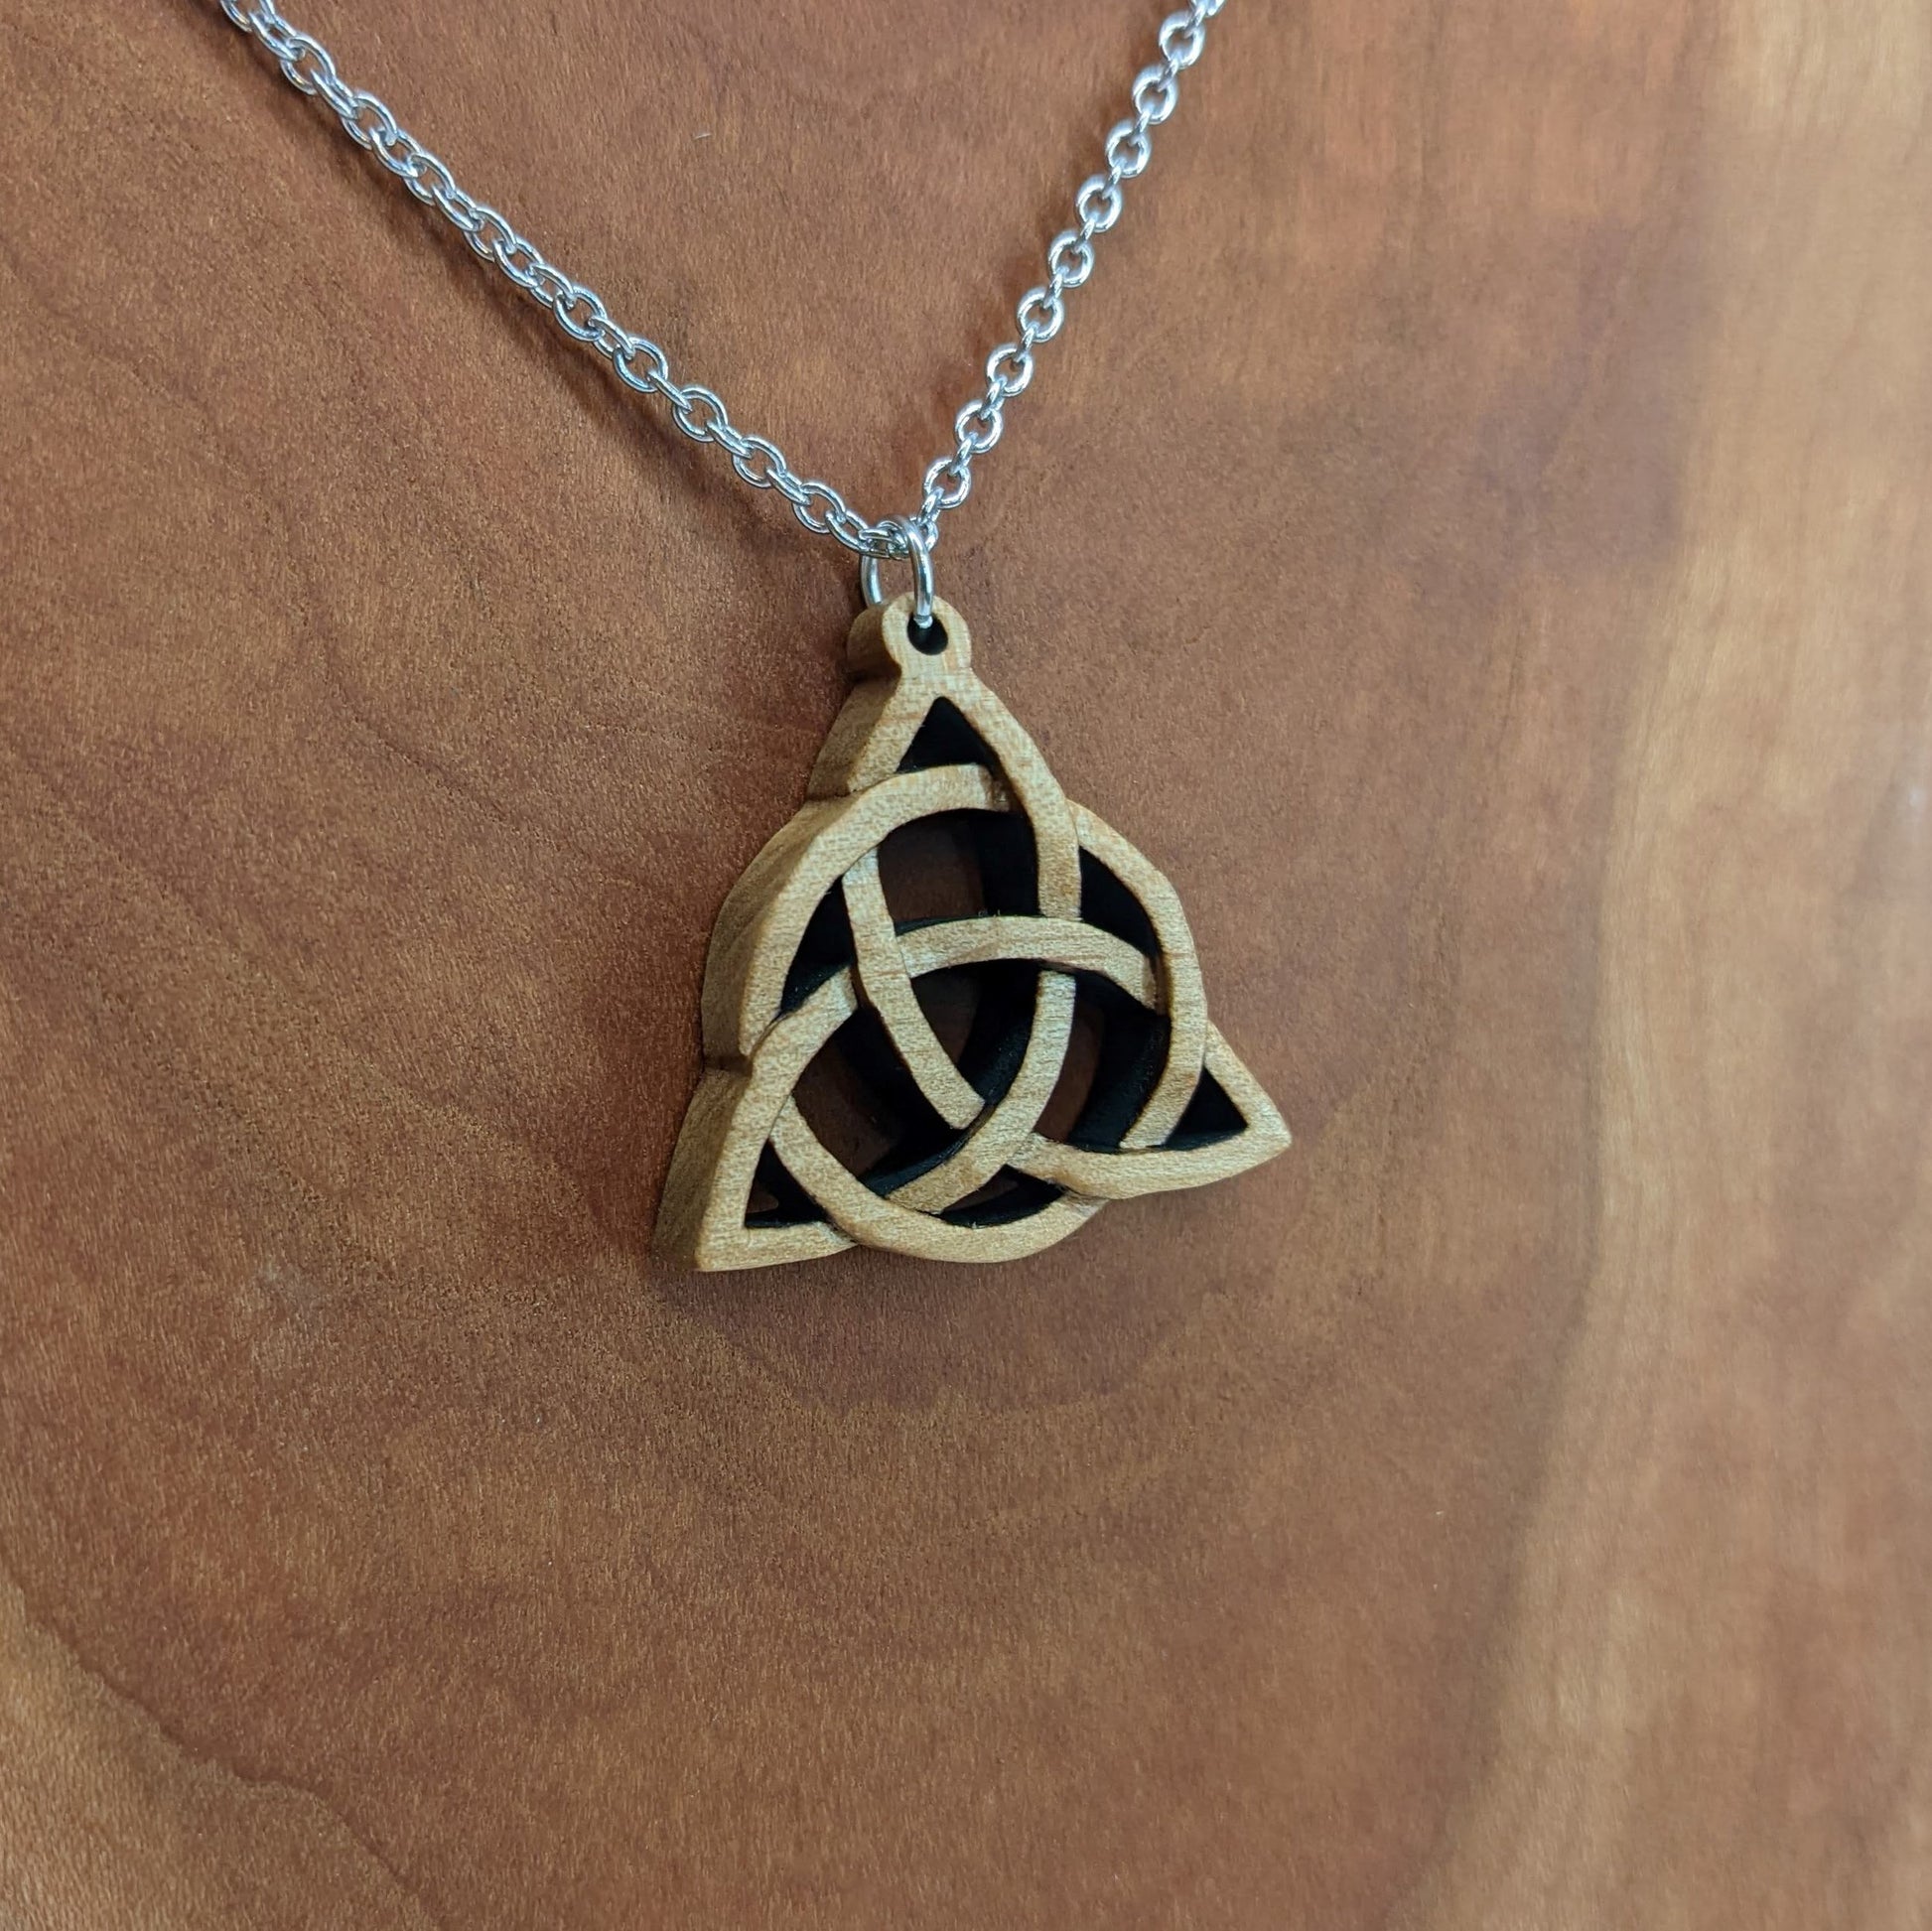 Wooden necklace pendant created in the style of a Celtic woven trinity symbol. Made from hard maple.  Hanging from a silver stainless steel chain against a cherry wood background.